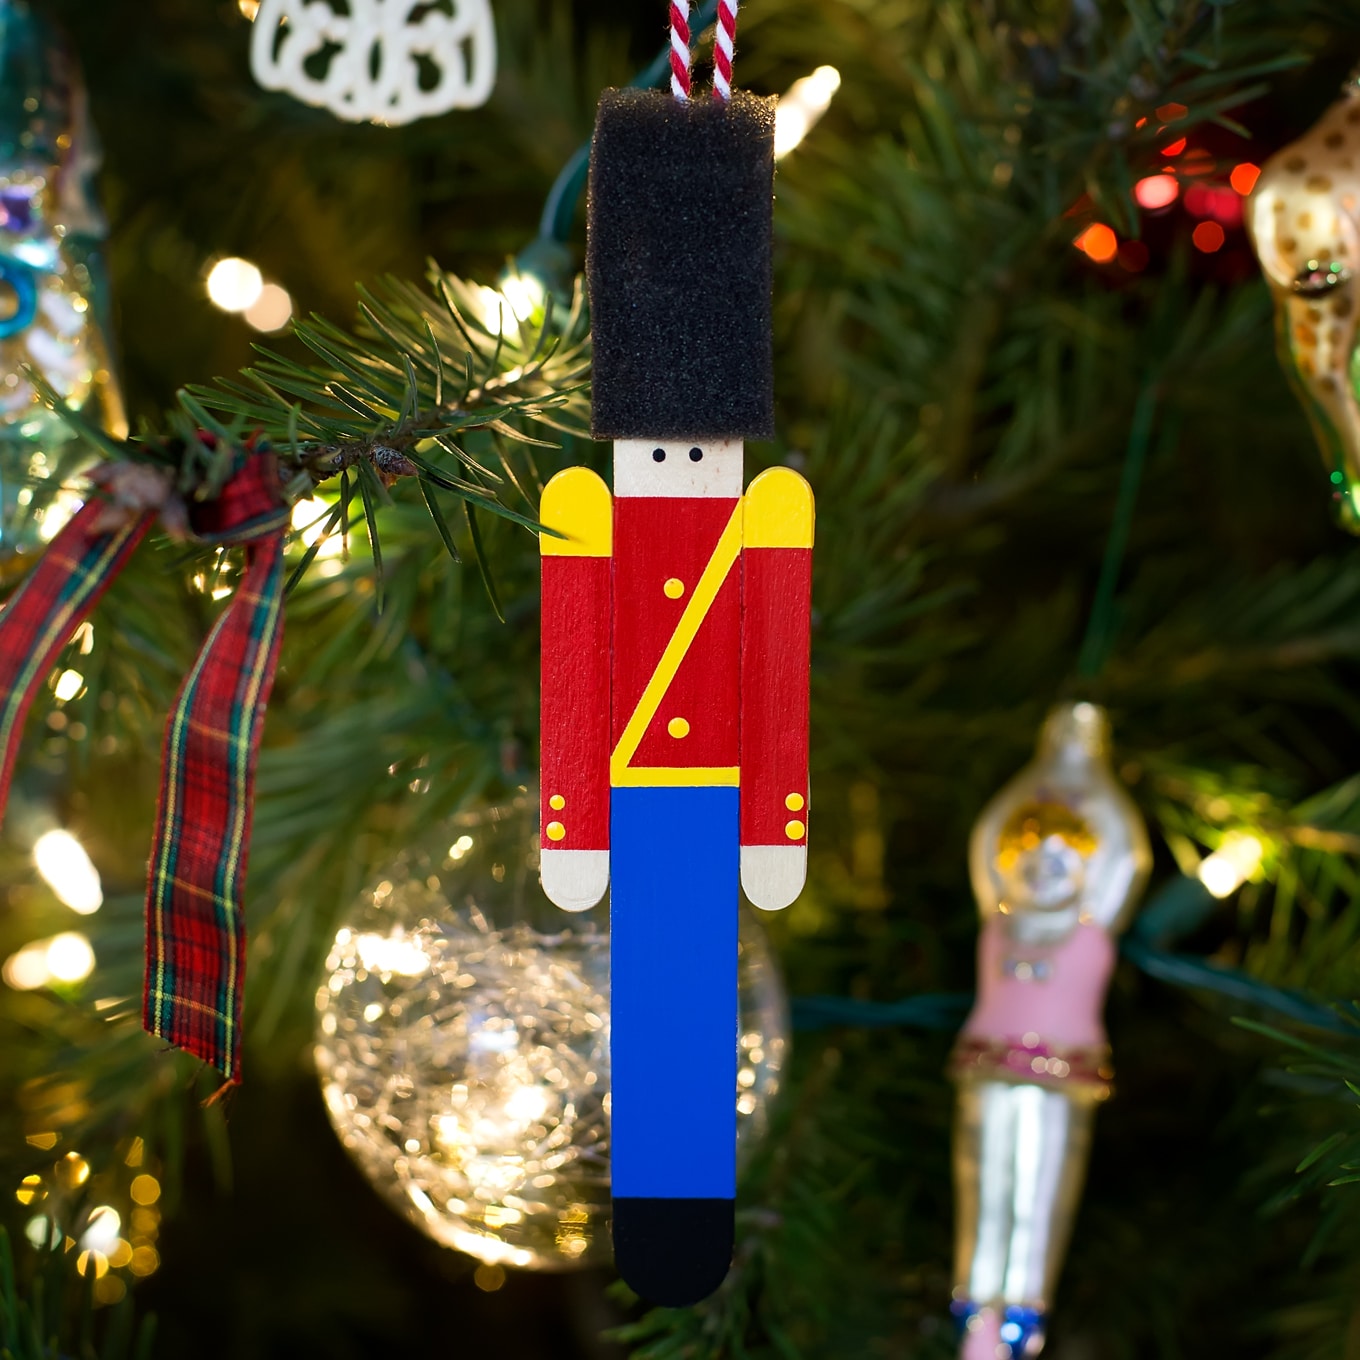 How to Make a Wooden Toy Soldier Ornament